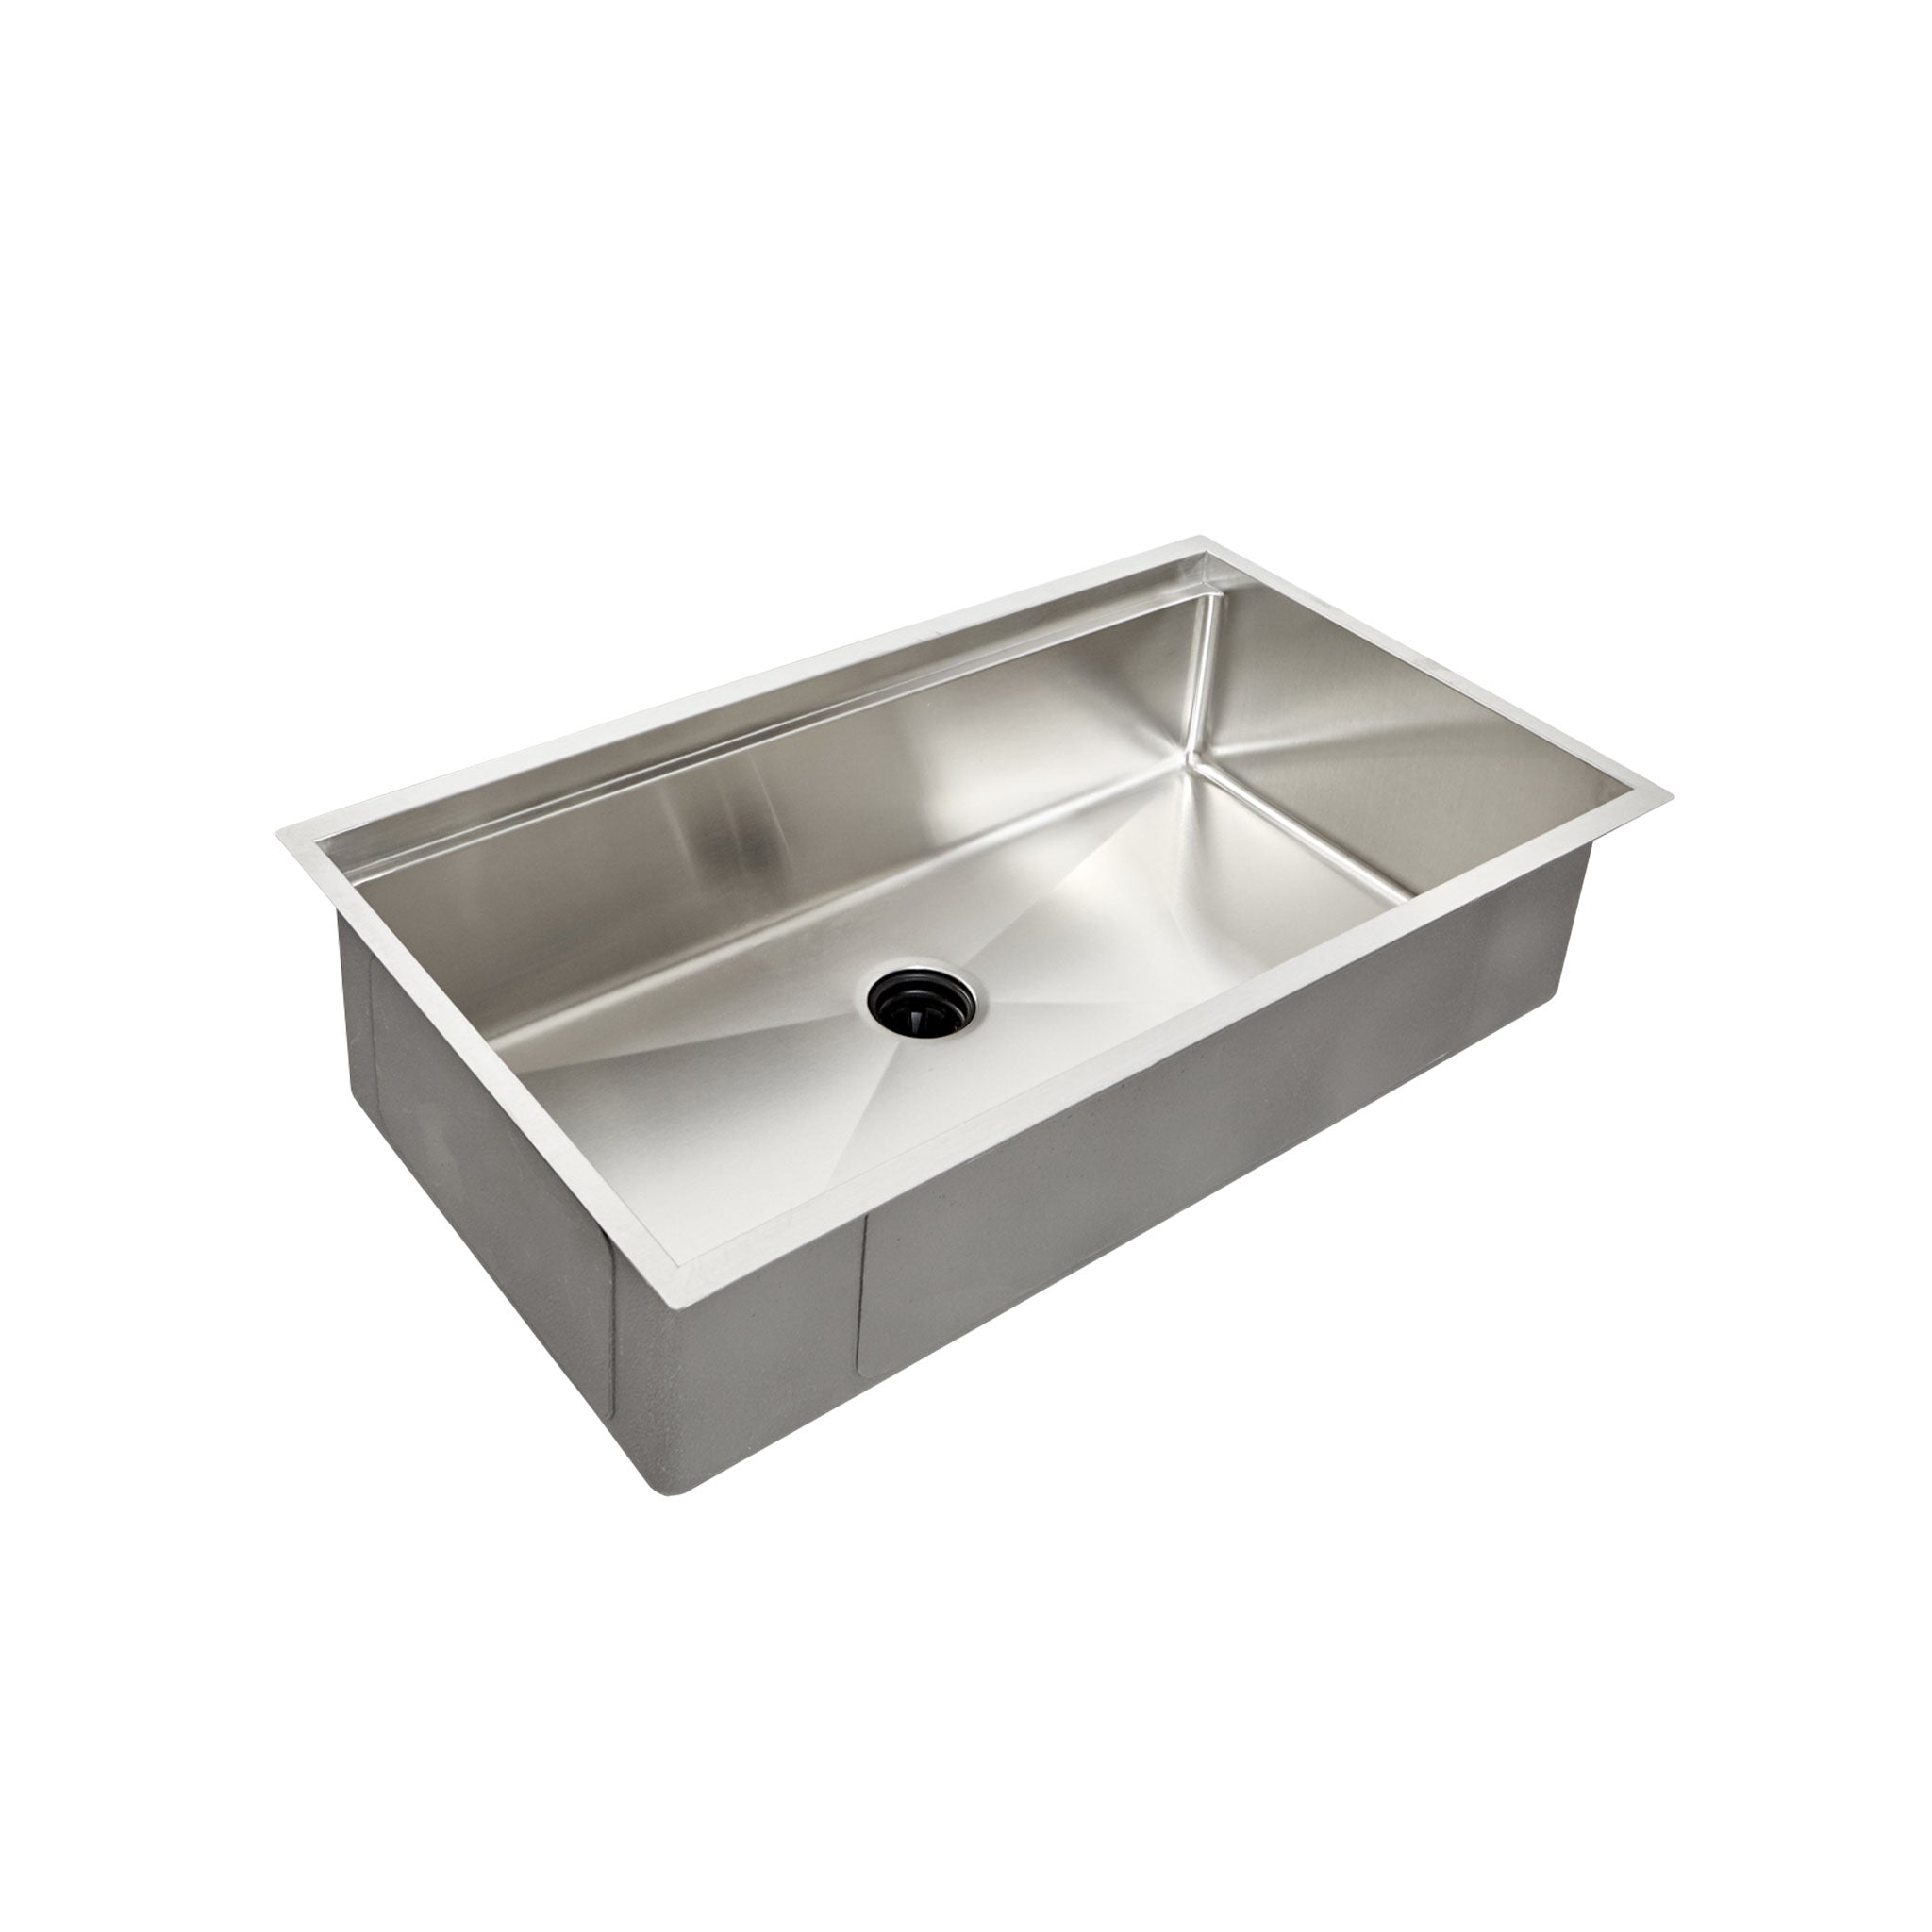 33 inch stainless steel workstation kitchen sink with a single basin and center seamless drain